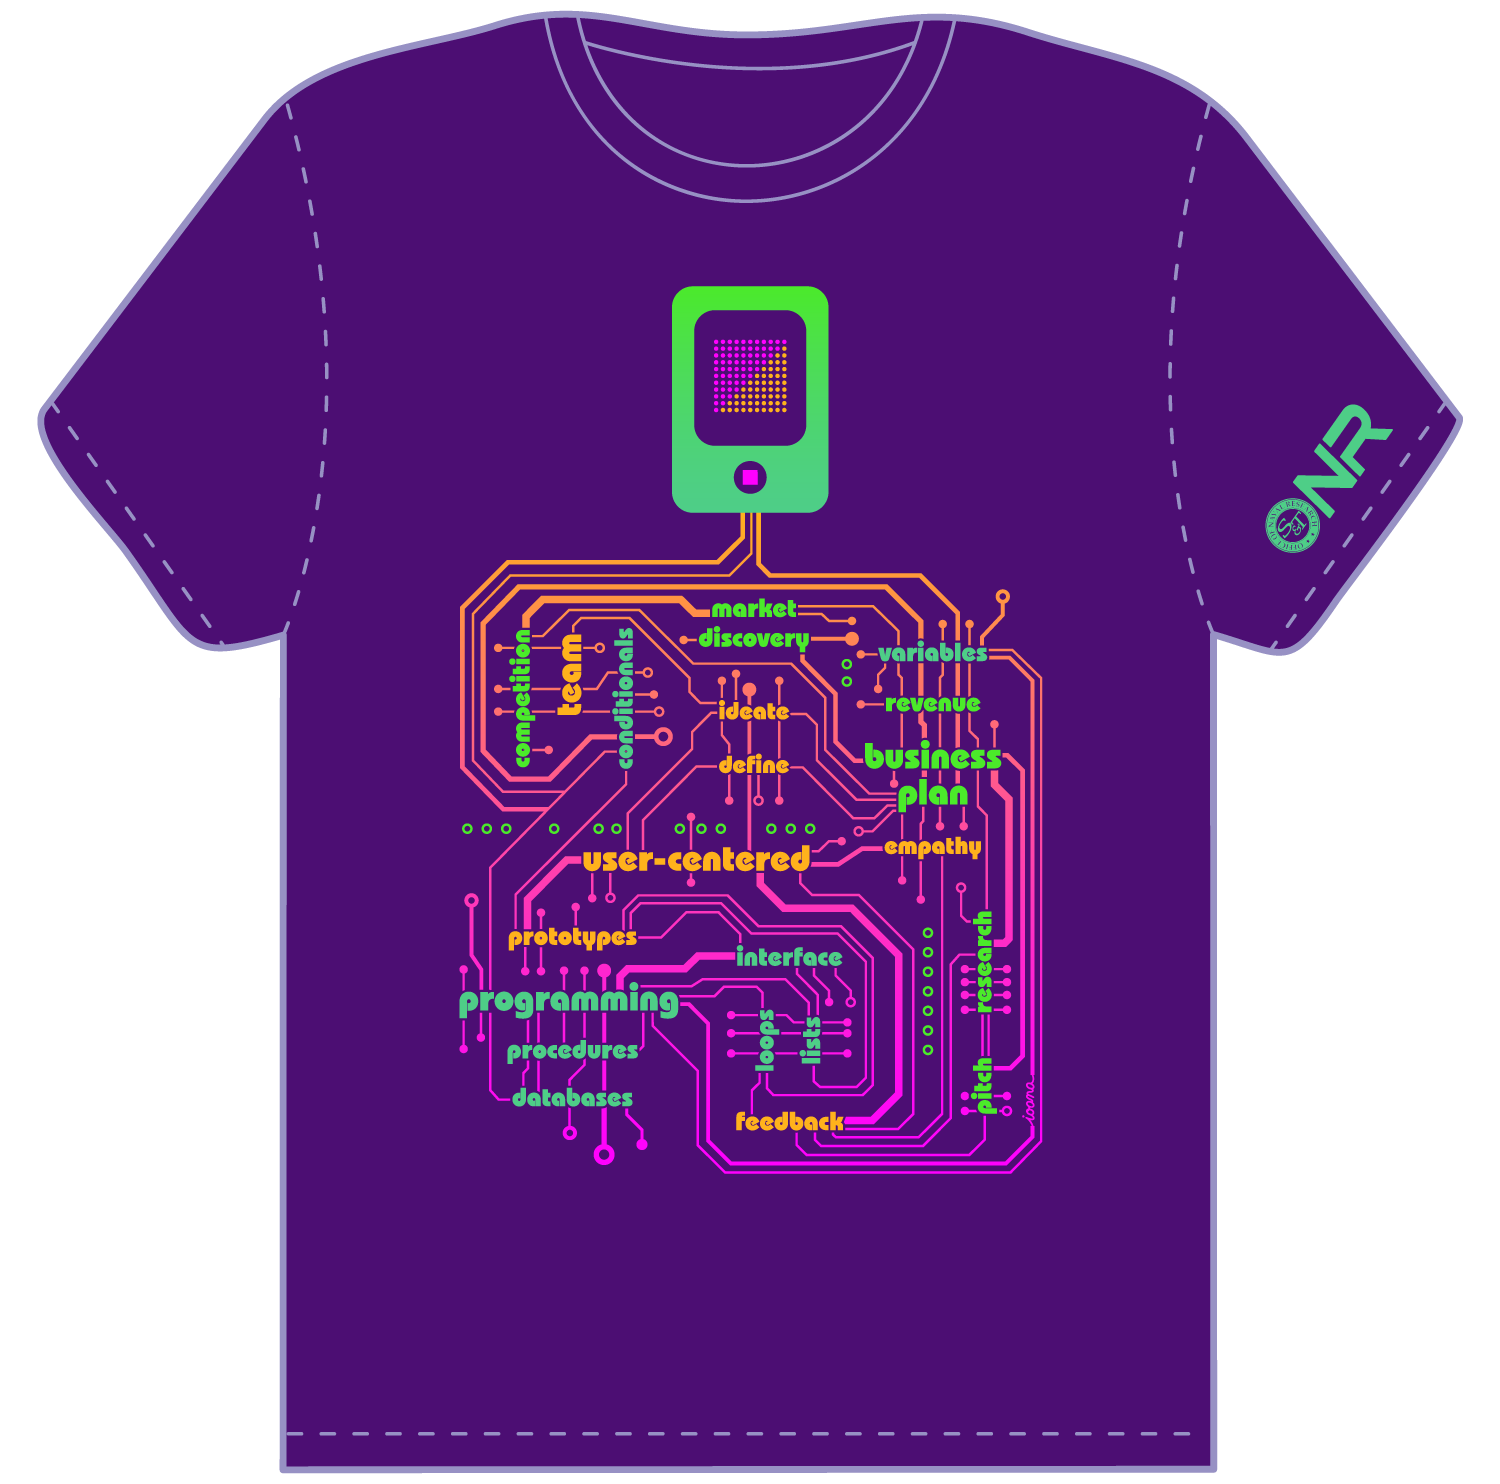 T-shirt for Iridescent's Technovation girls entrepreneurship coding program showing a circuit board going into a phone